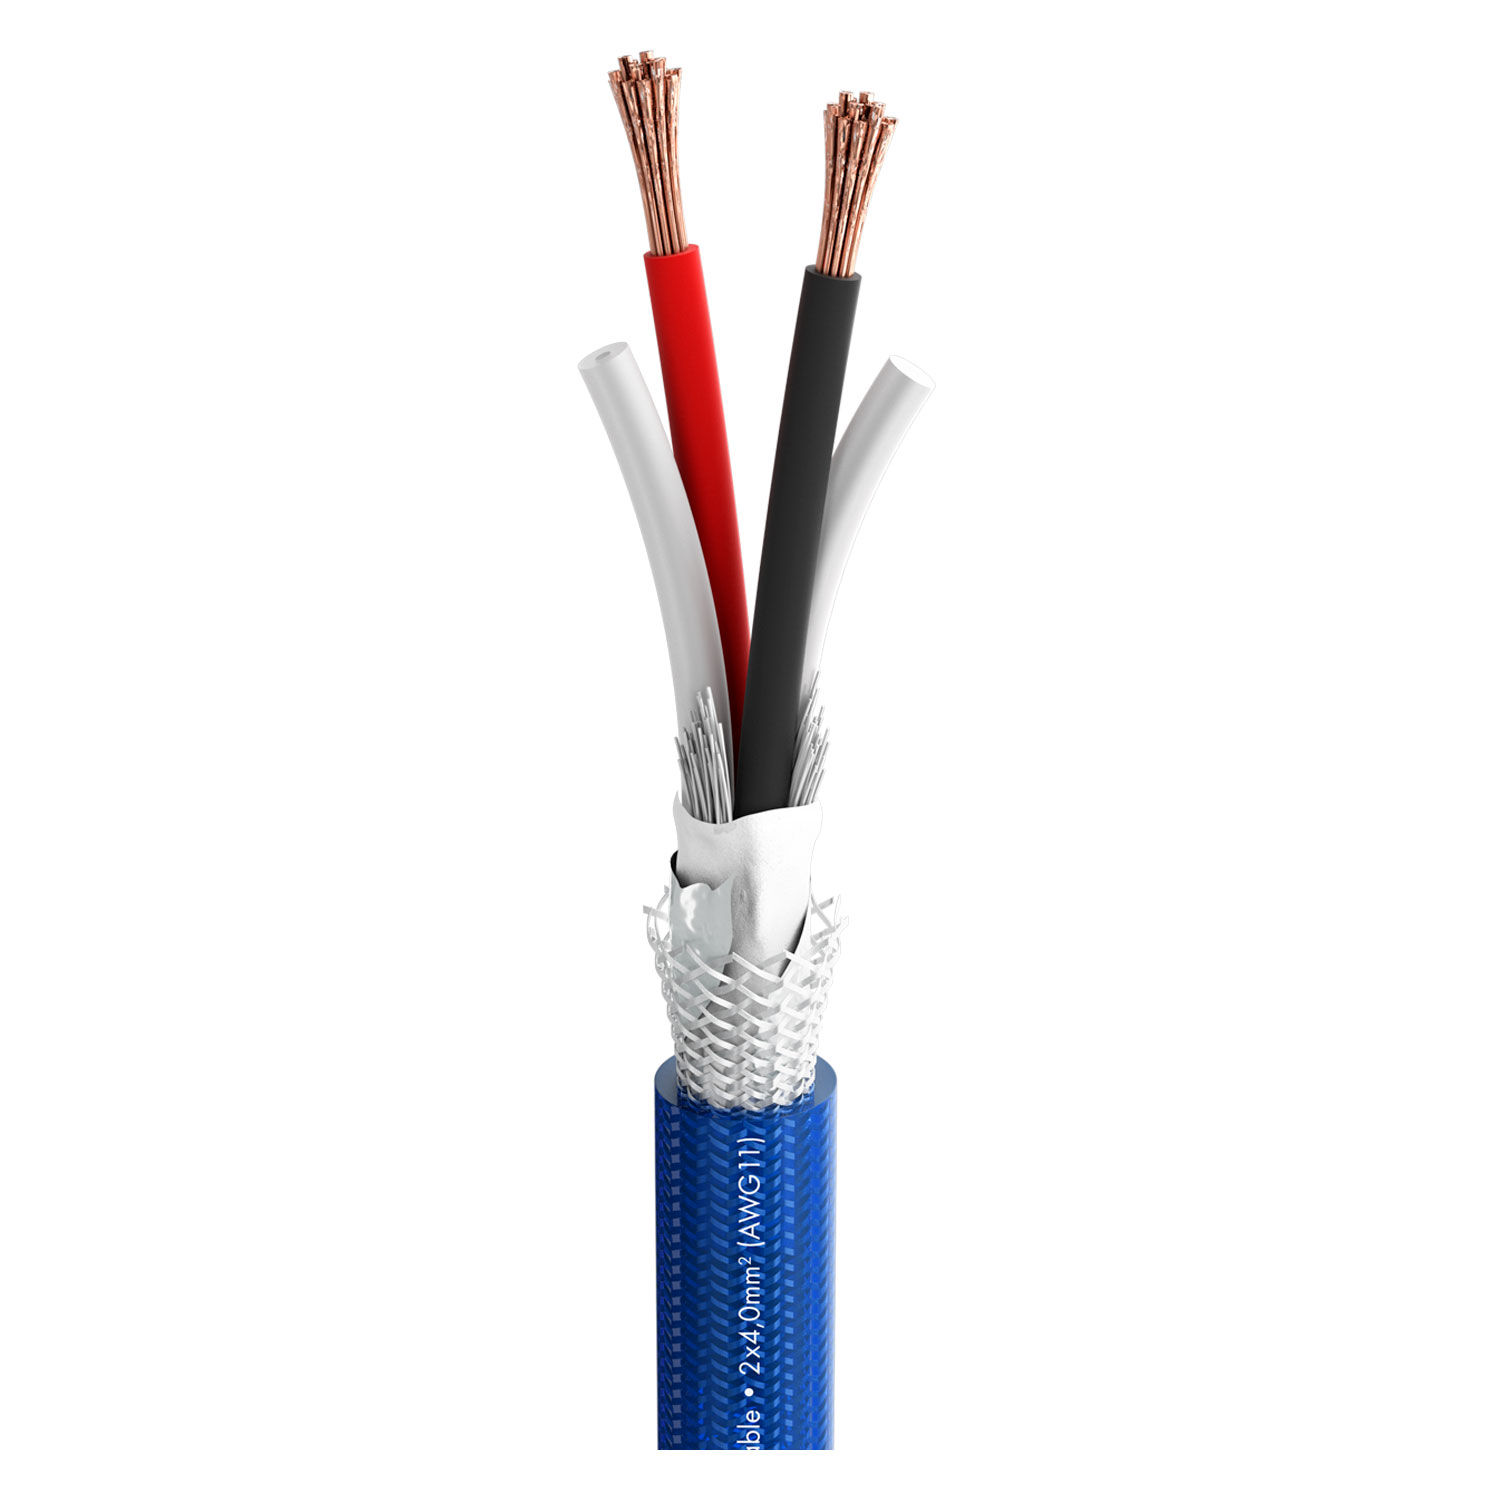 Sommer Cable Speaker Cable SC-DUAL BLUE; 2 x 4,00 mm²; S-PVC Ø 15,50 mm; blue